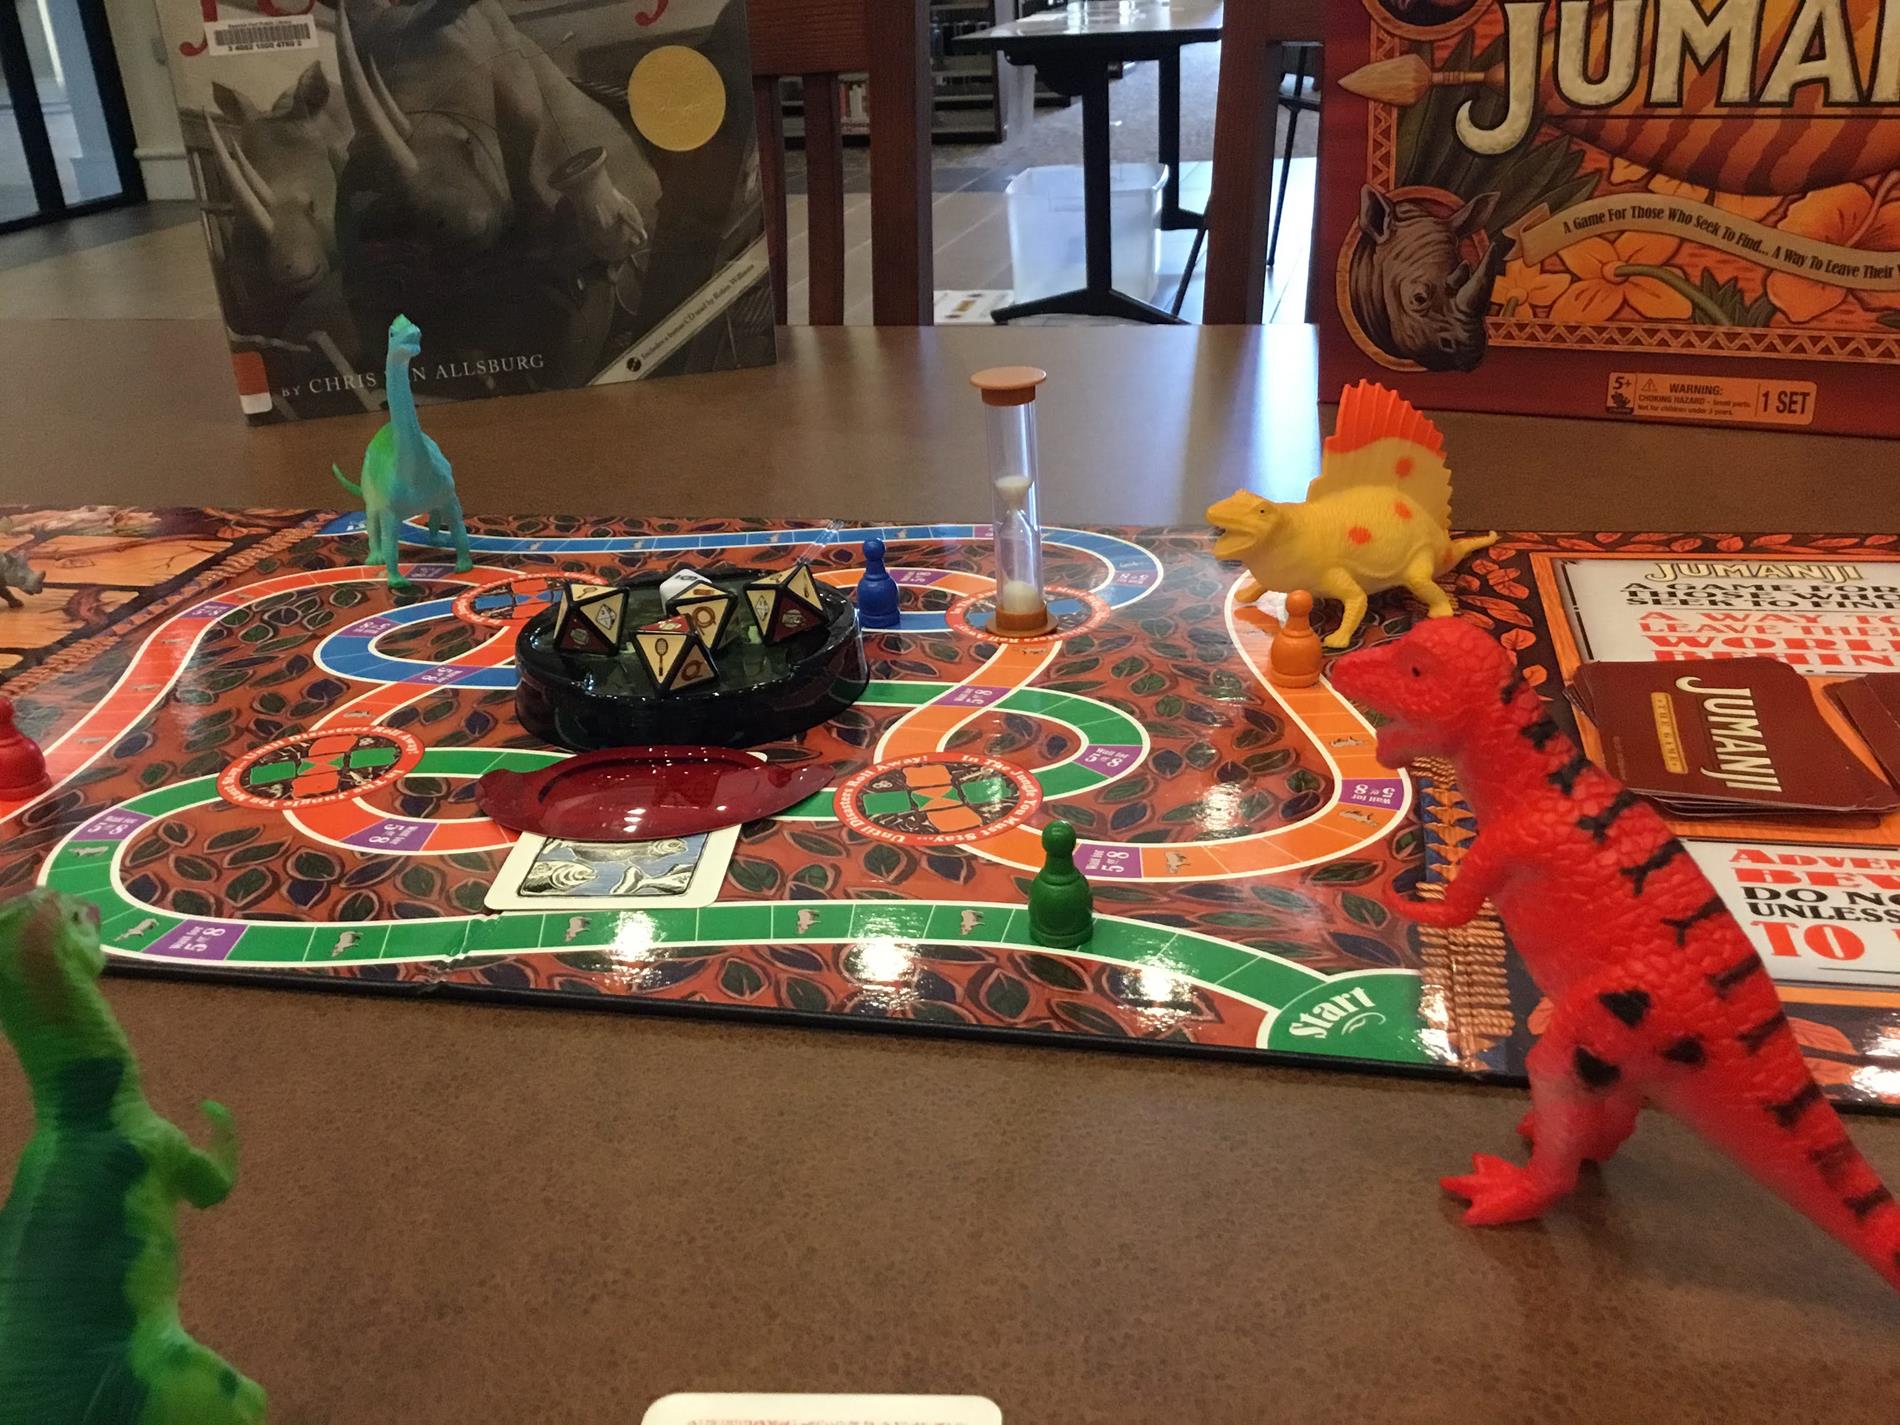 toy dinosaur figures arranged on the game board of the Jumanji board game.